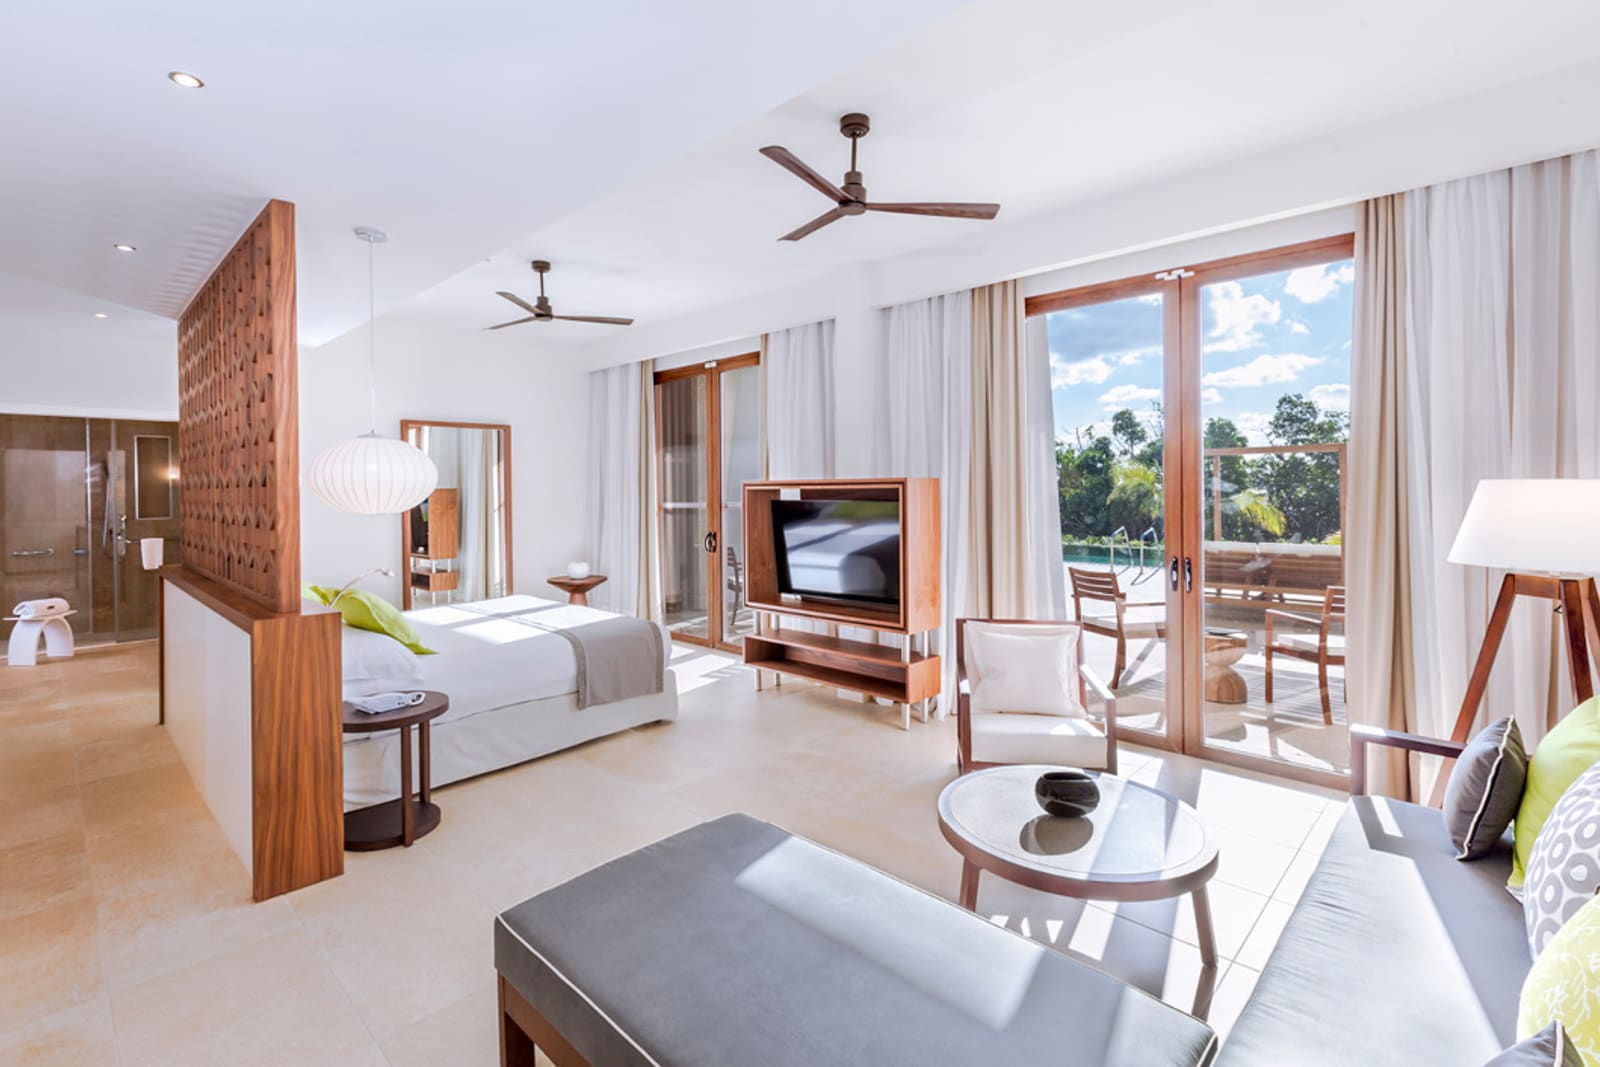 A bright and airy suite at the adults-only all-inclusive Meliá Buenavista resort in Cayo Santa Maria, Cuba